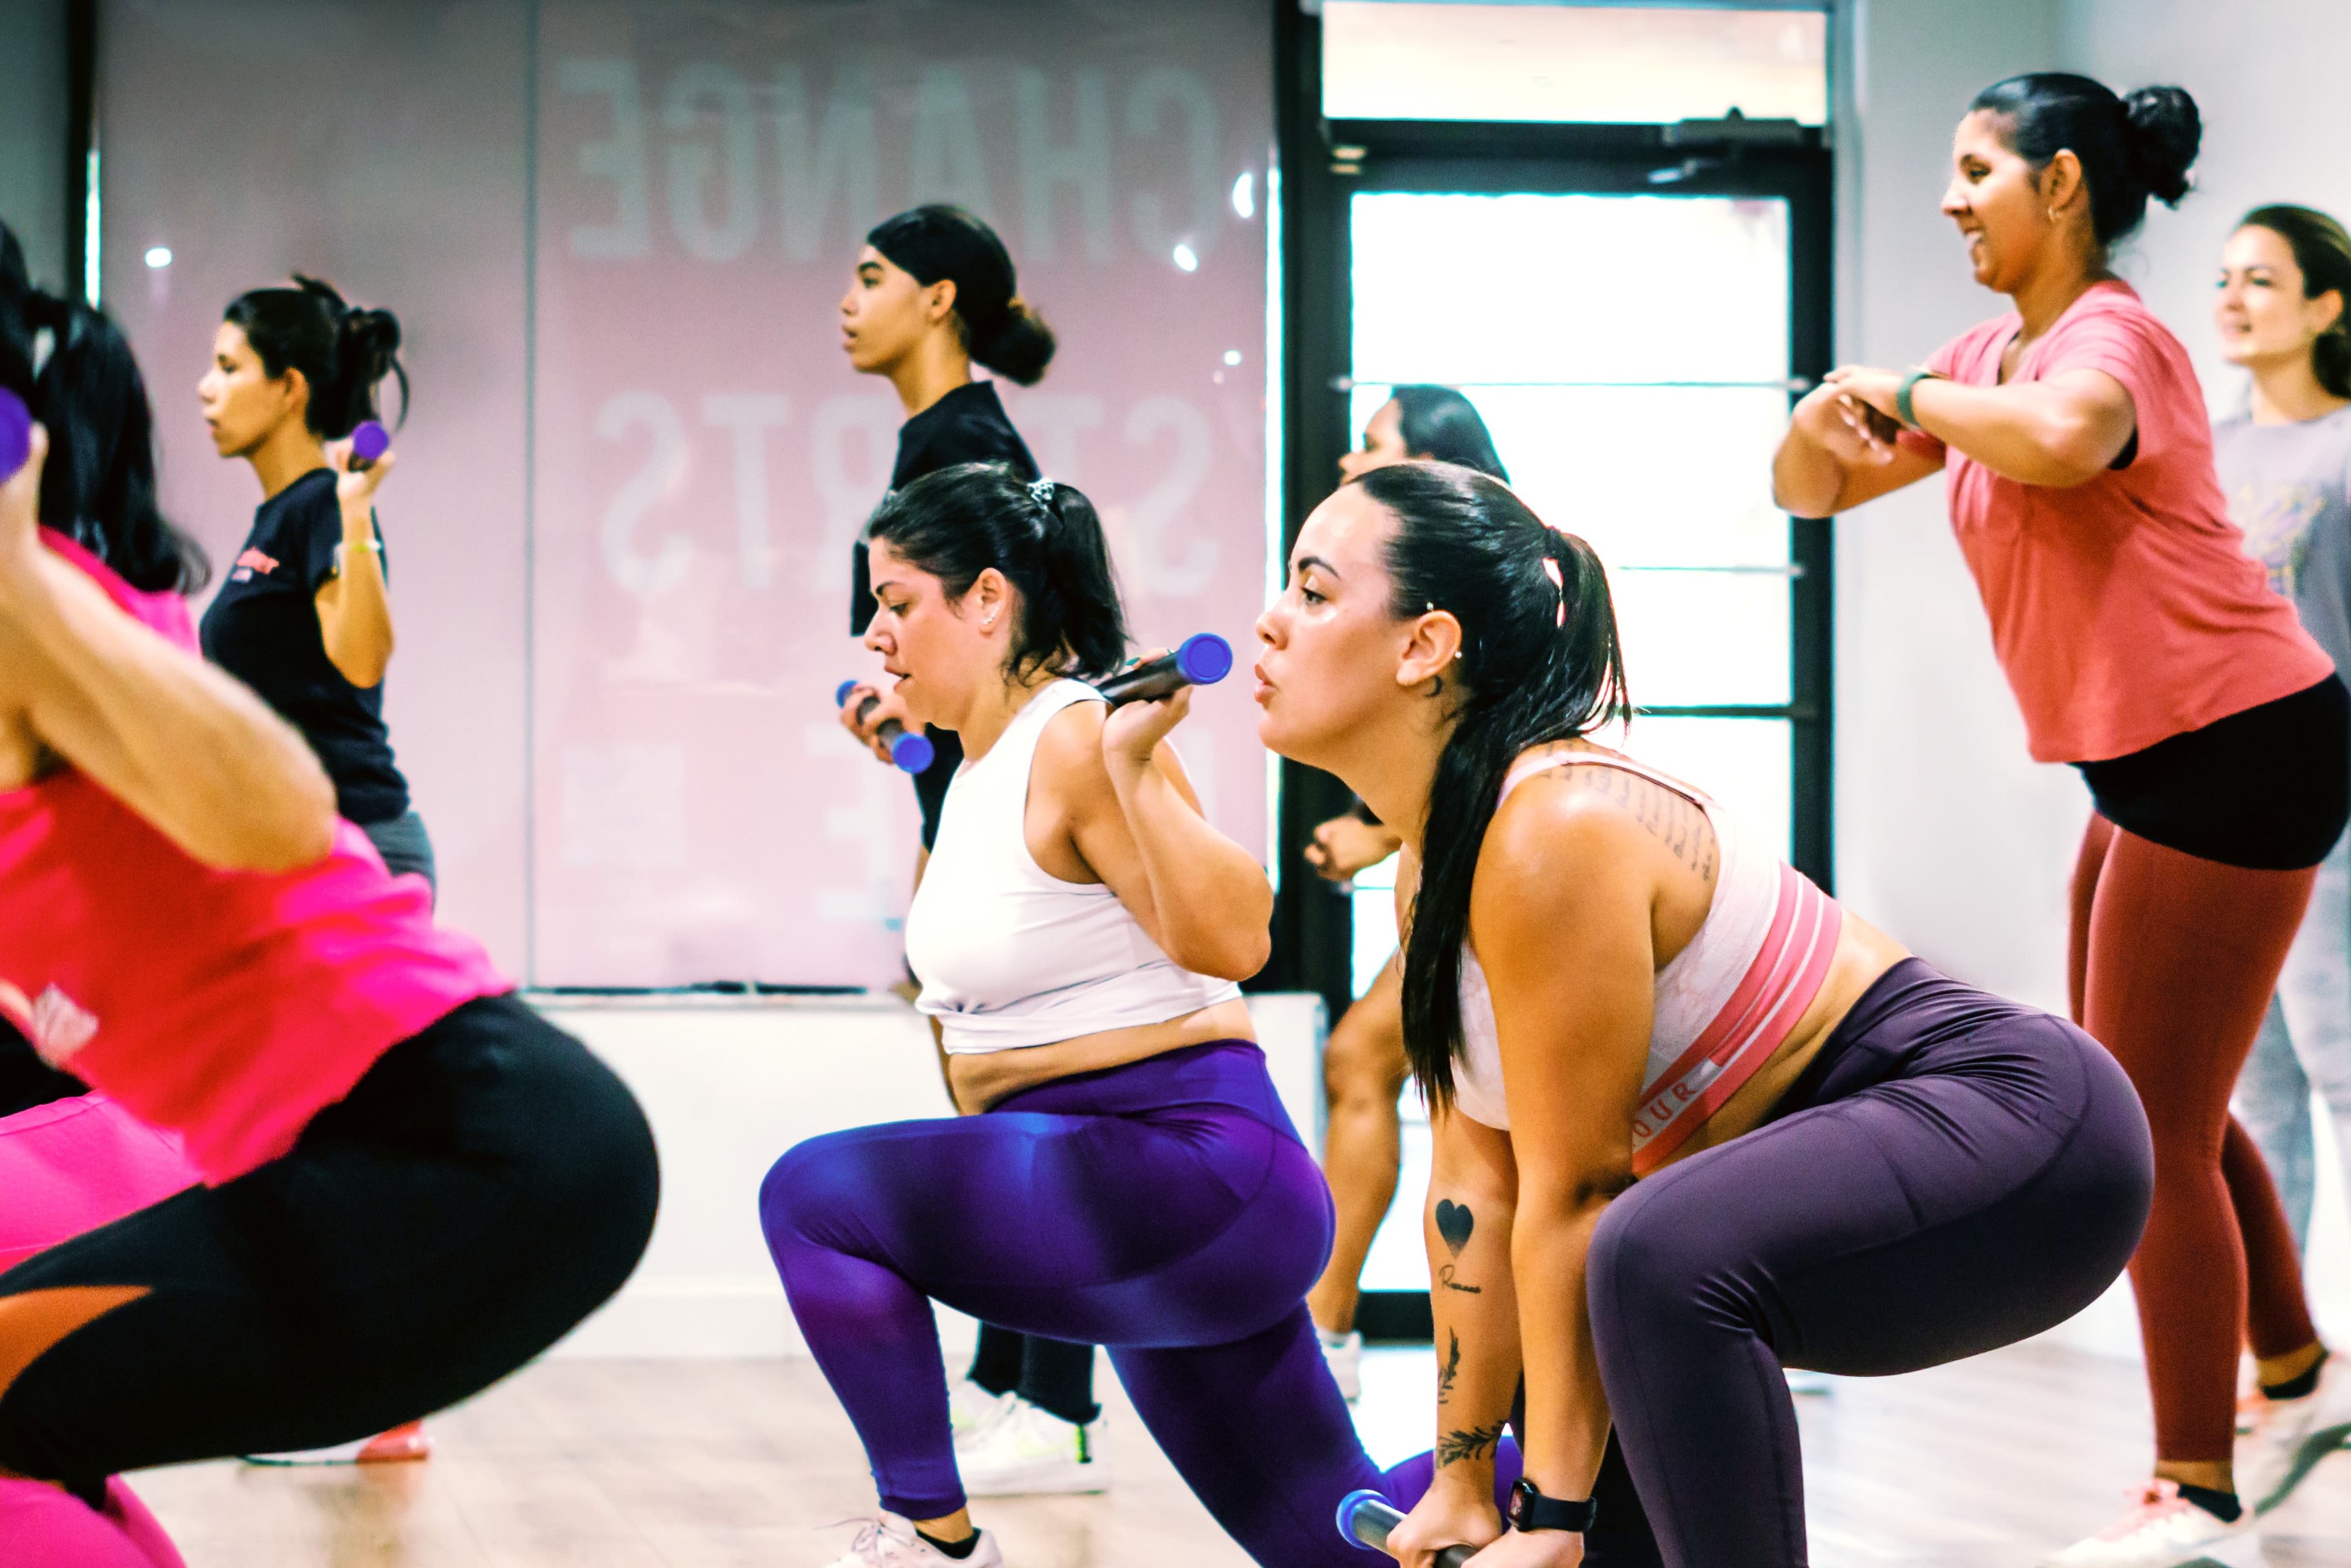 Club Pilates - Parkway Central: Read Reviews and Book Classes on ClassPass